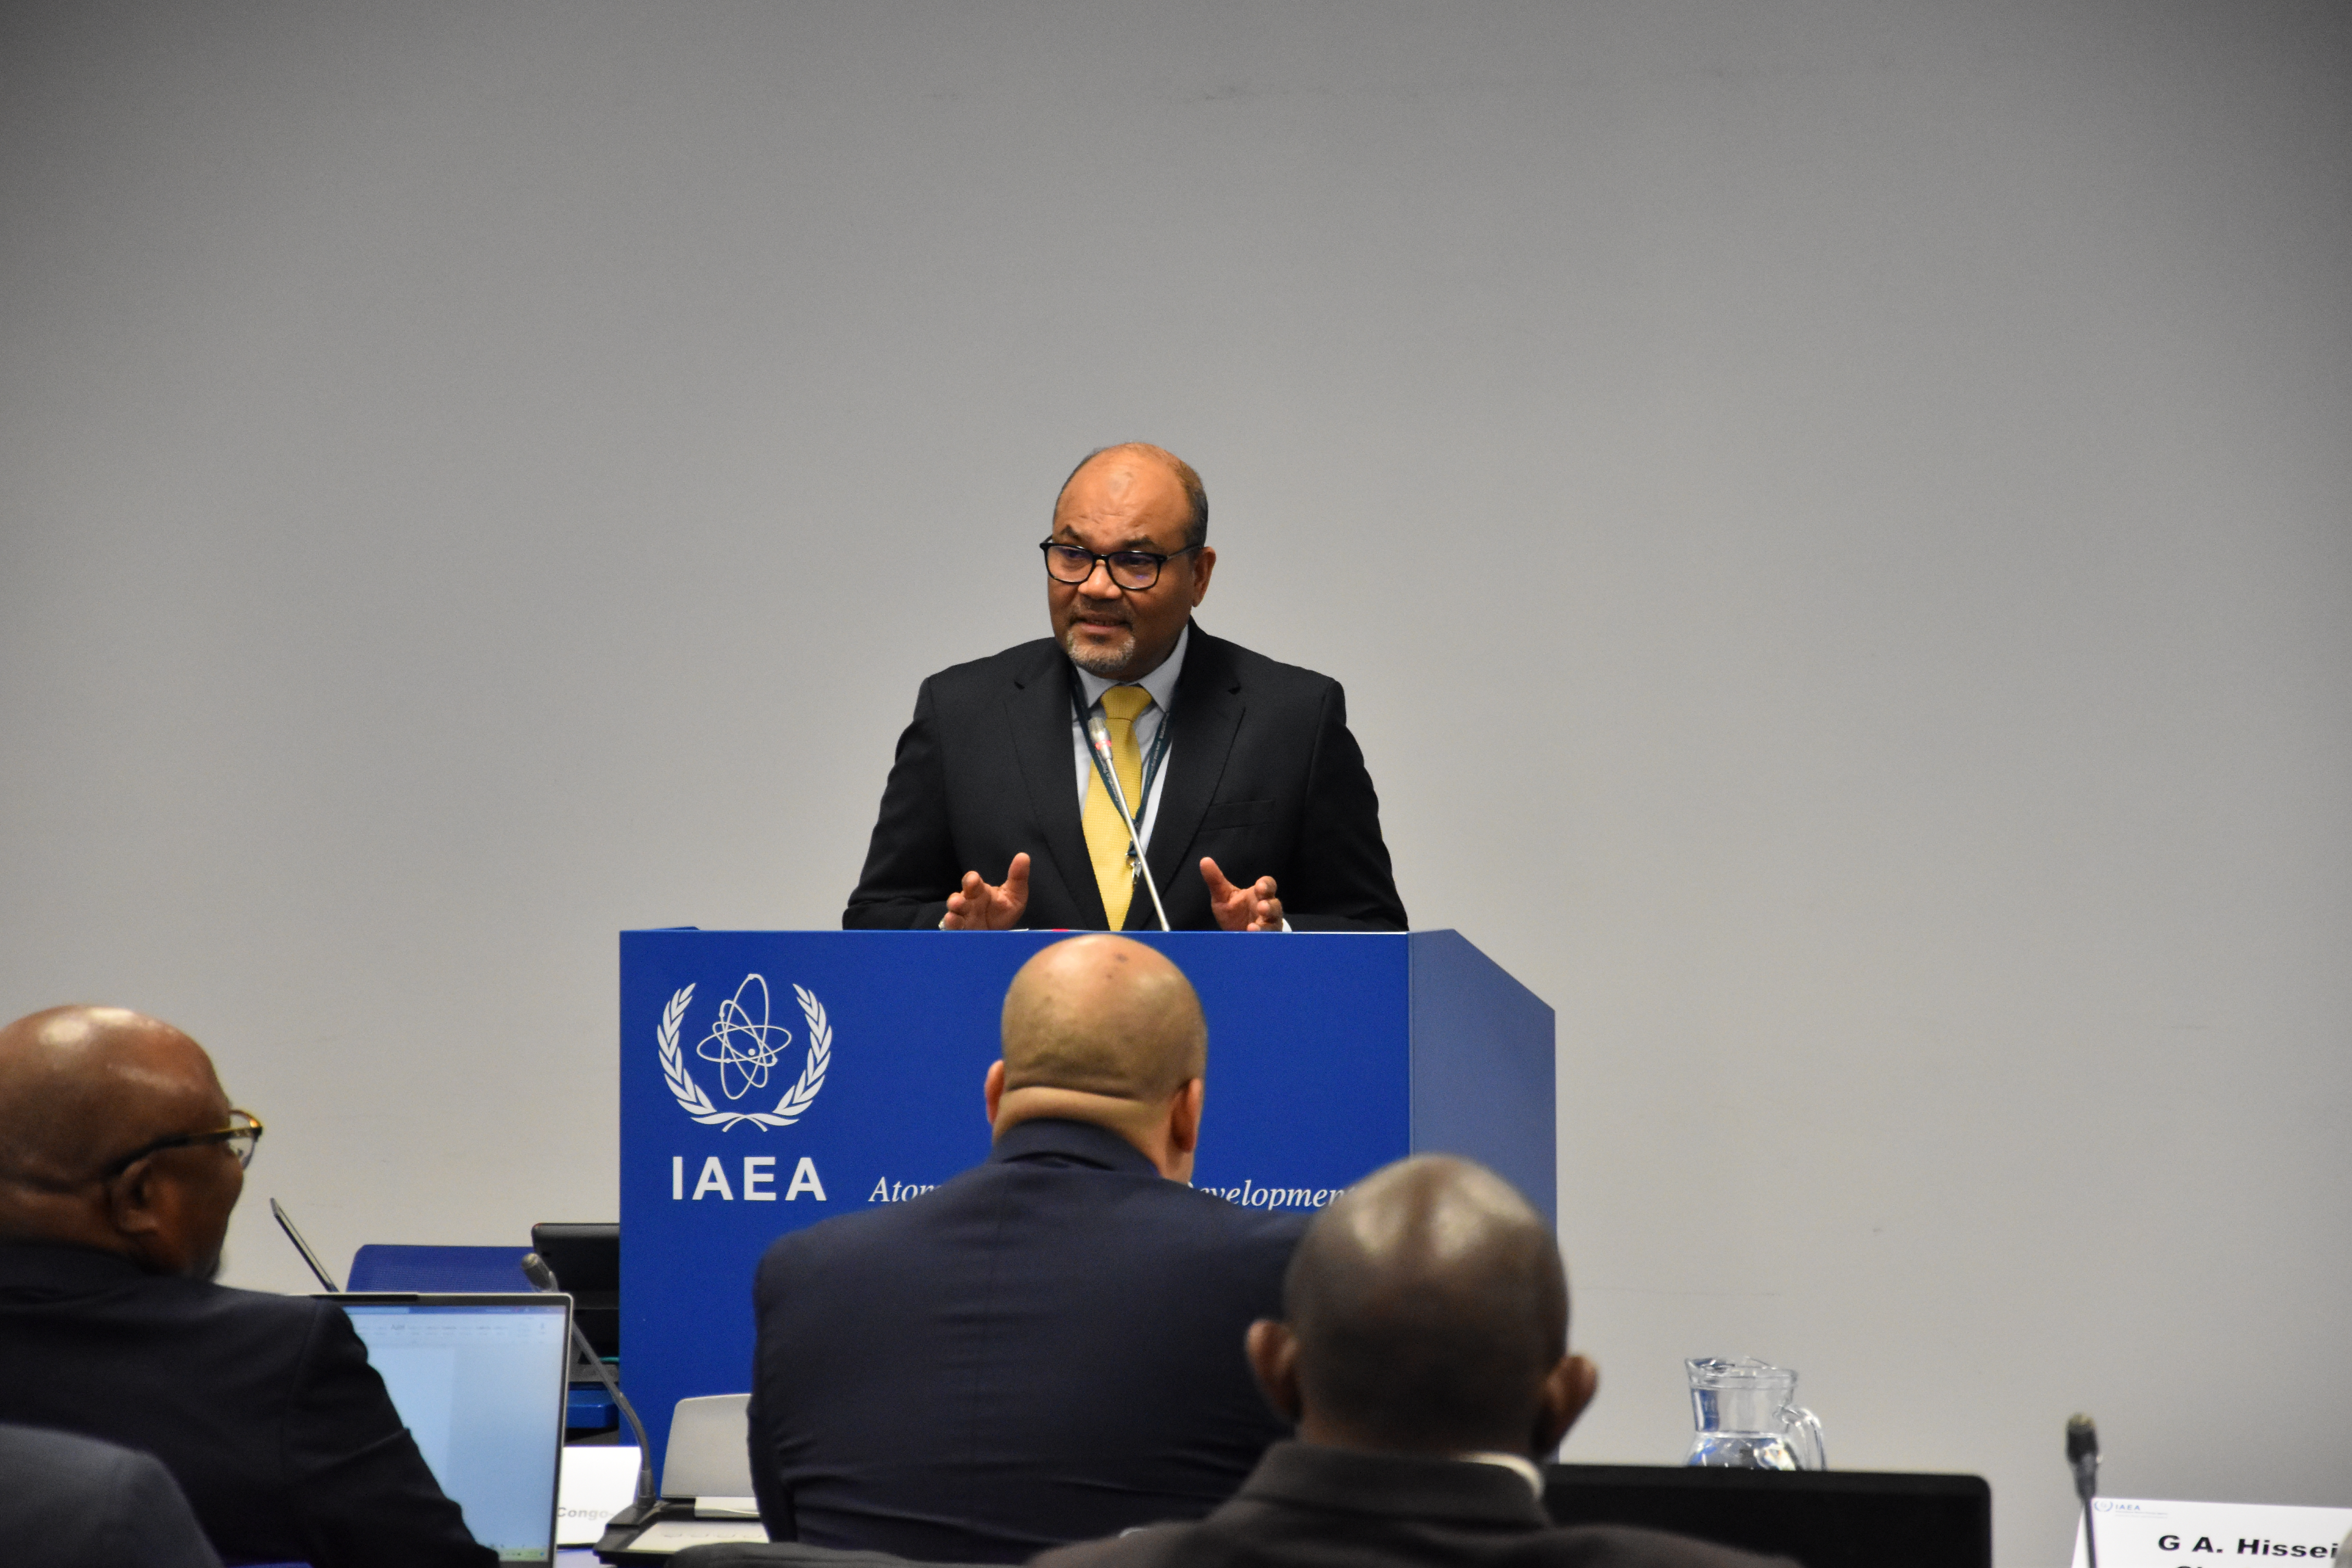 IAEA Director of the TC Division for Africa, Shaukat Abdulrazak delivers his remarks at the opening session of the event.